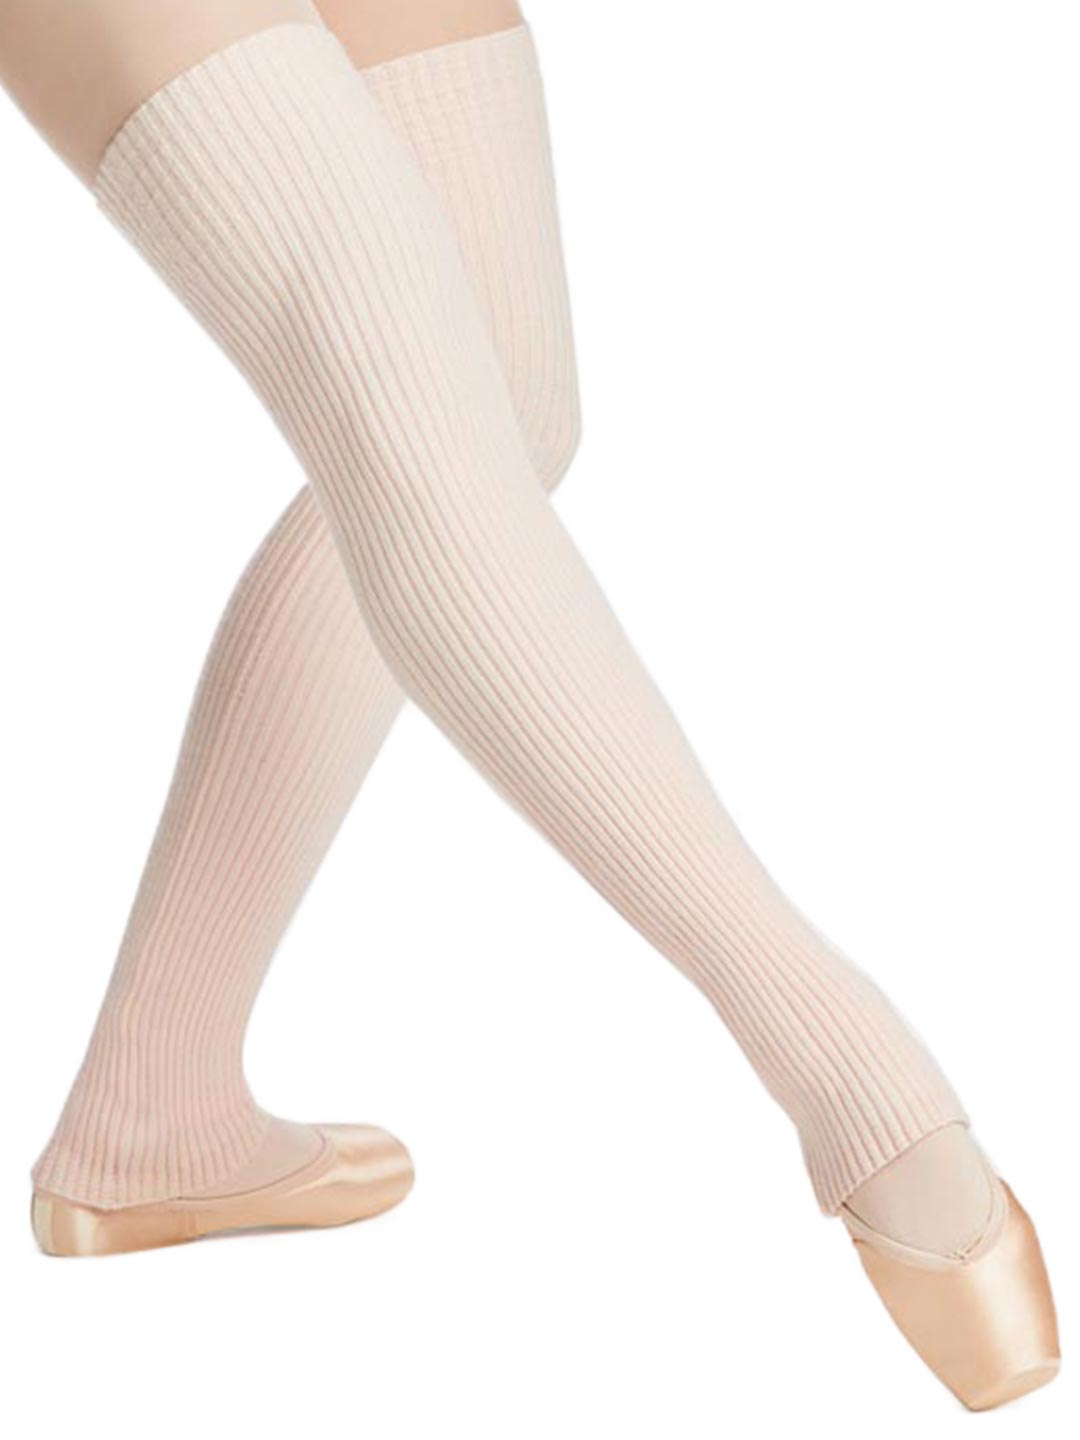 Capezio 36" Knit Legwarmers - Pink sold by The Collective Dancewear